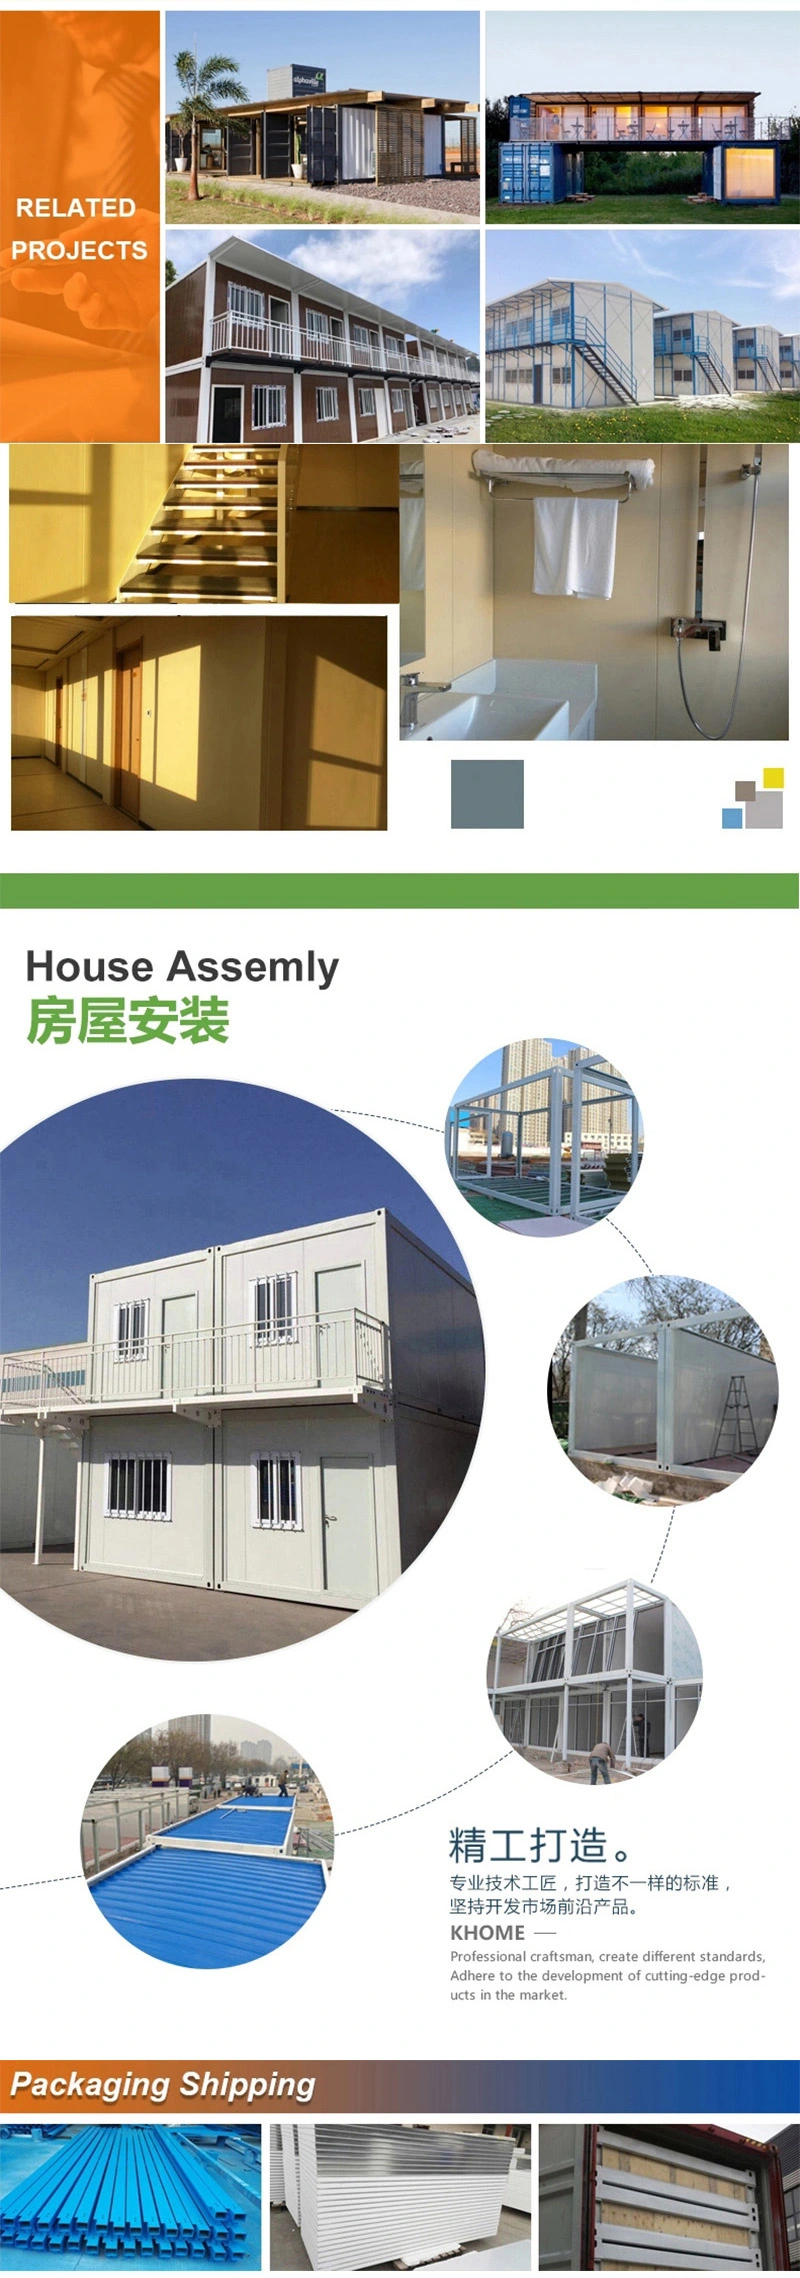 dormitory container,mobile dormitory,mobile home container homes,dormitory,dormitory container house